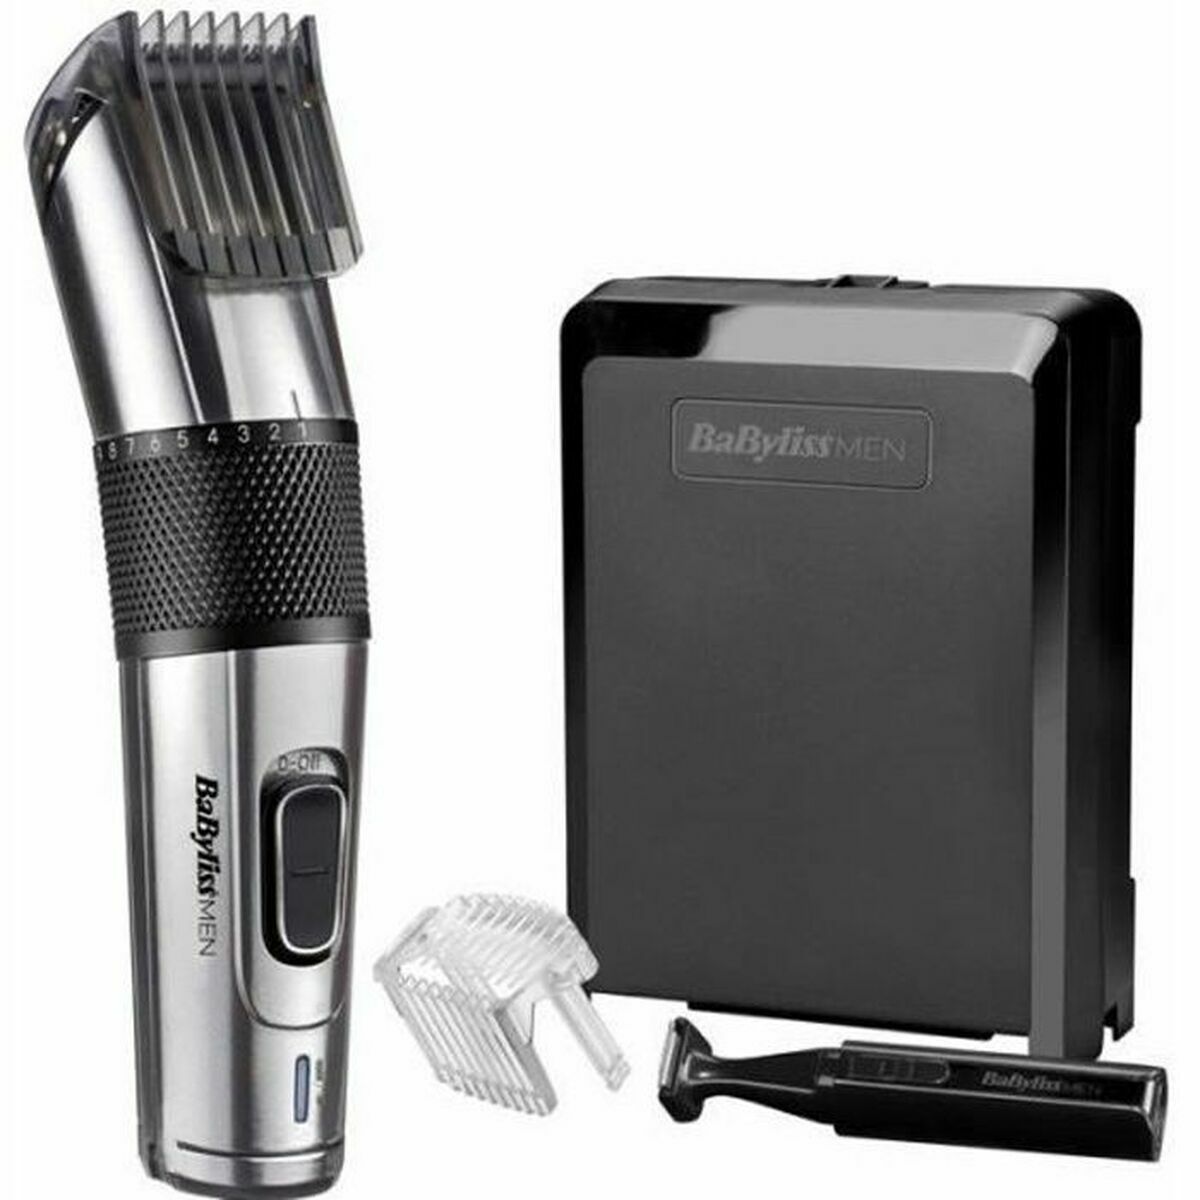 Hair Clippers Babyliss E977E-0